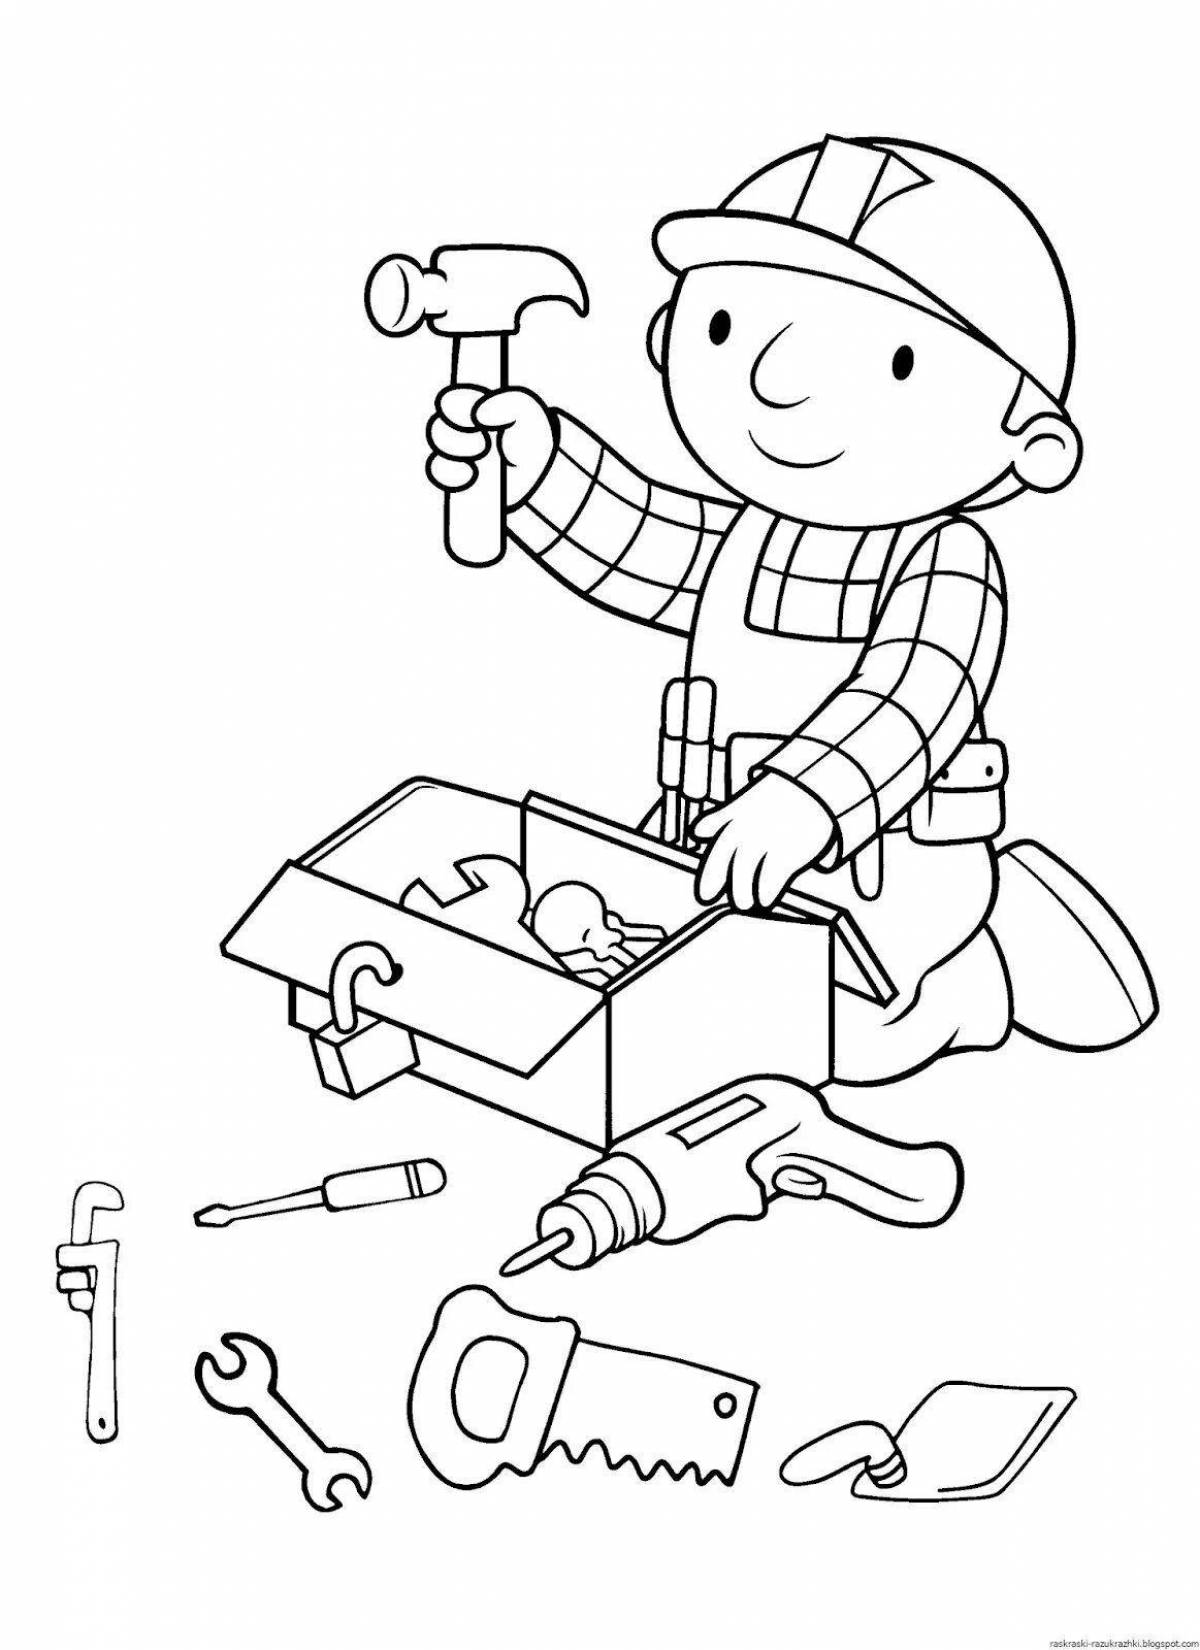 Coloring tools for children 4-5 years old